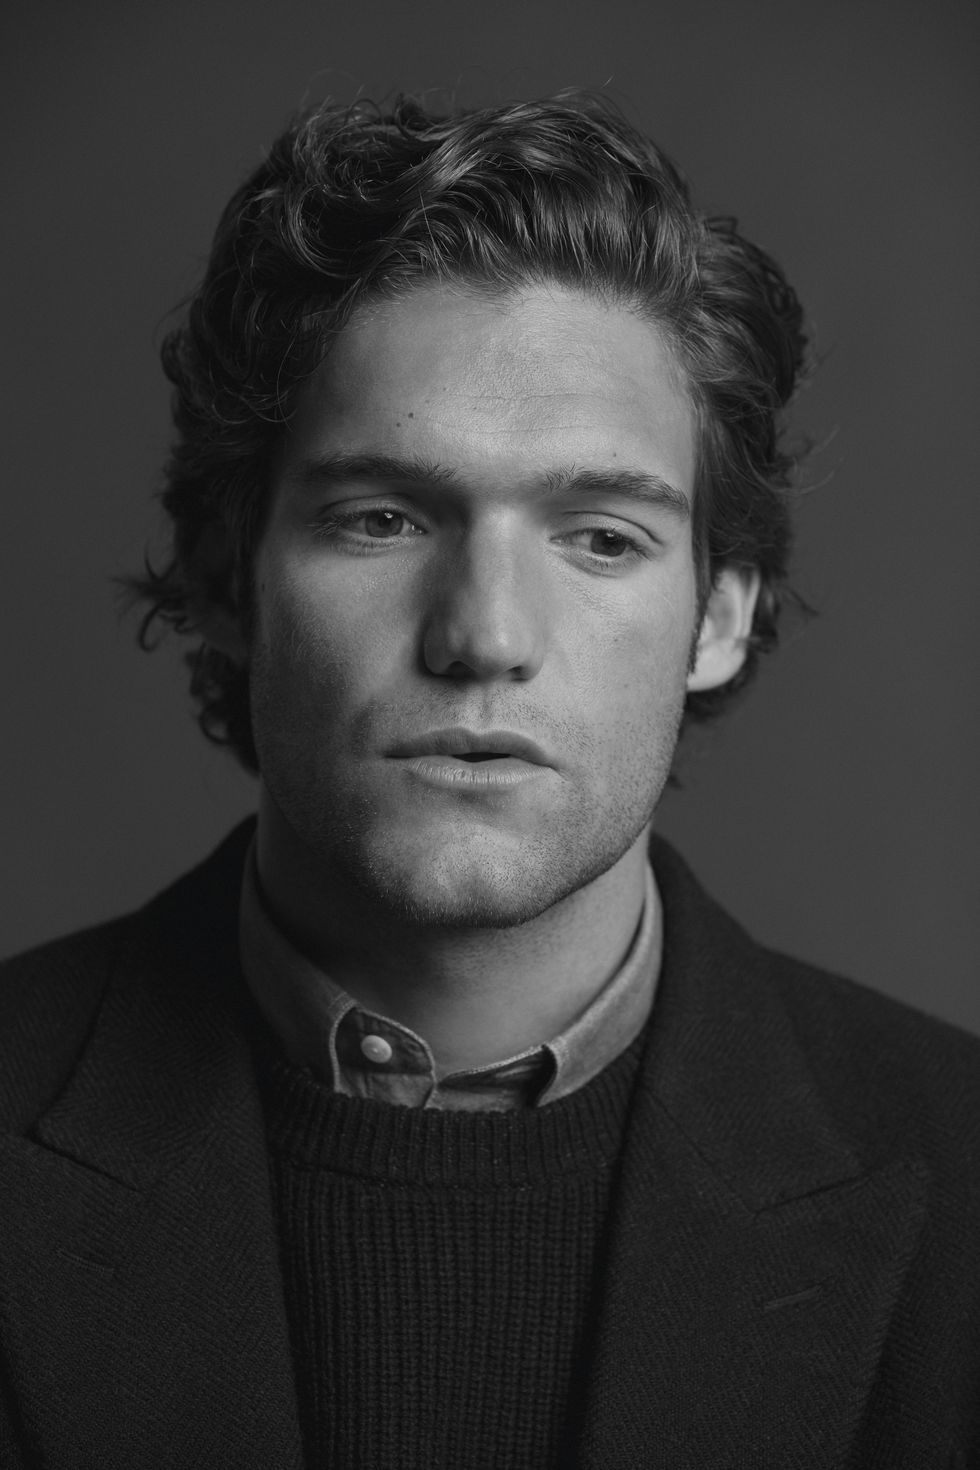 Marcos Alonso Esquire